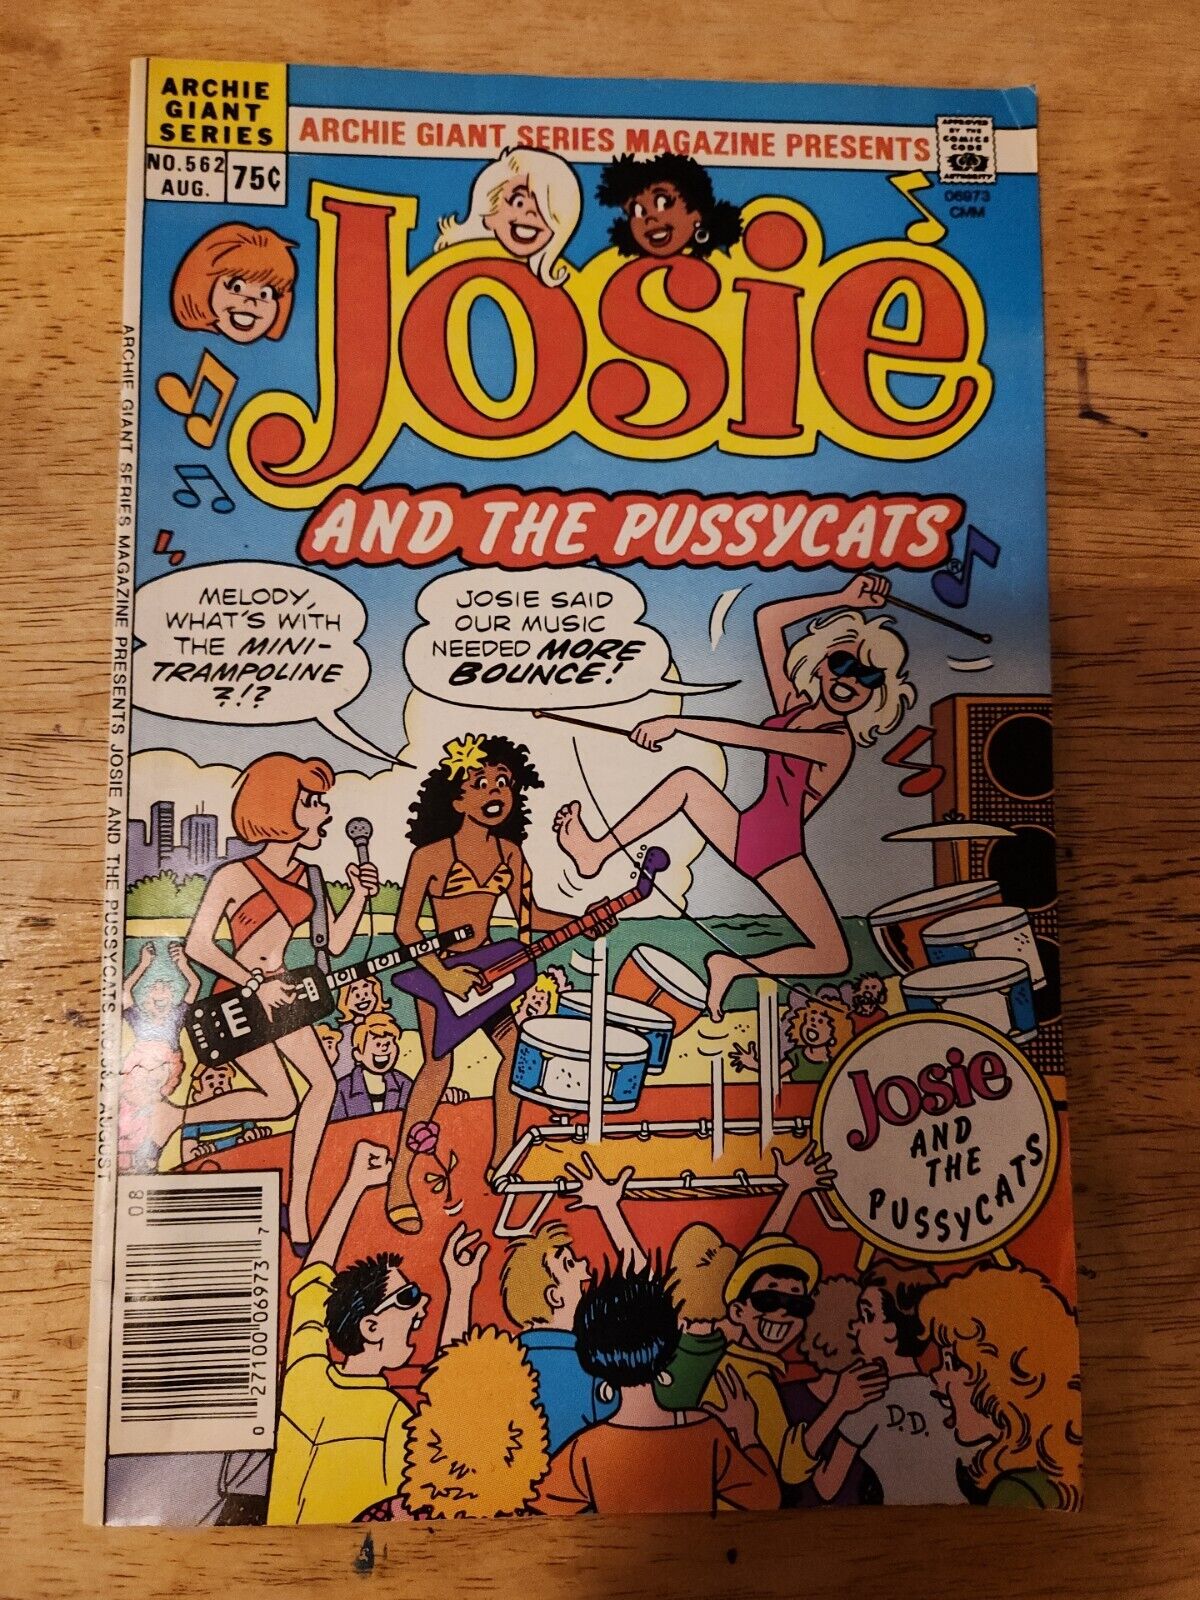 Archie Giant Series Josie And The Pussycats #562 Swimsuit Cover Newsstand